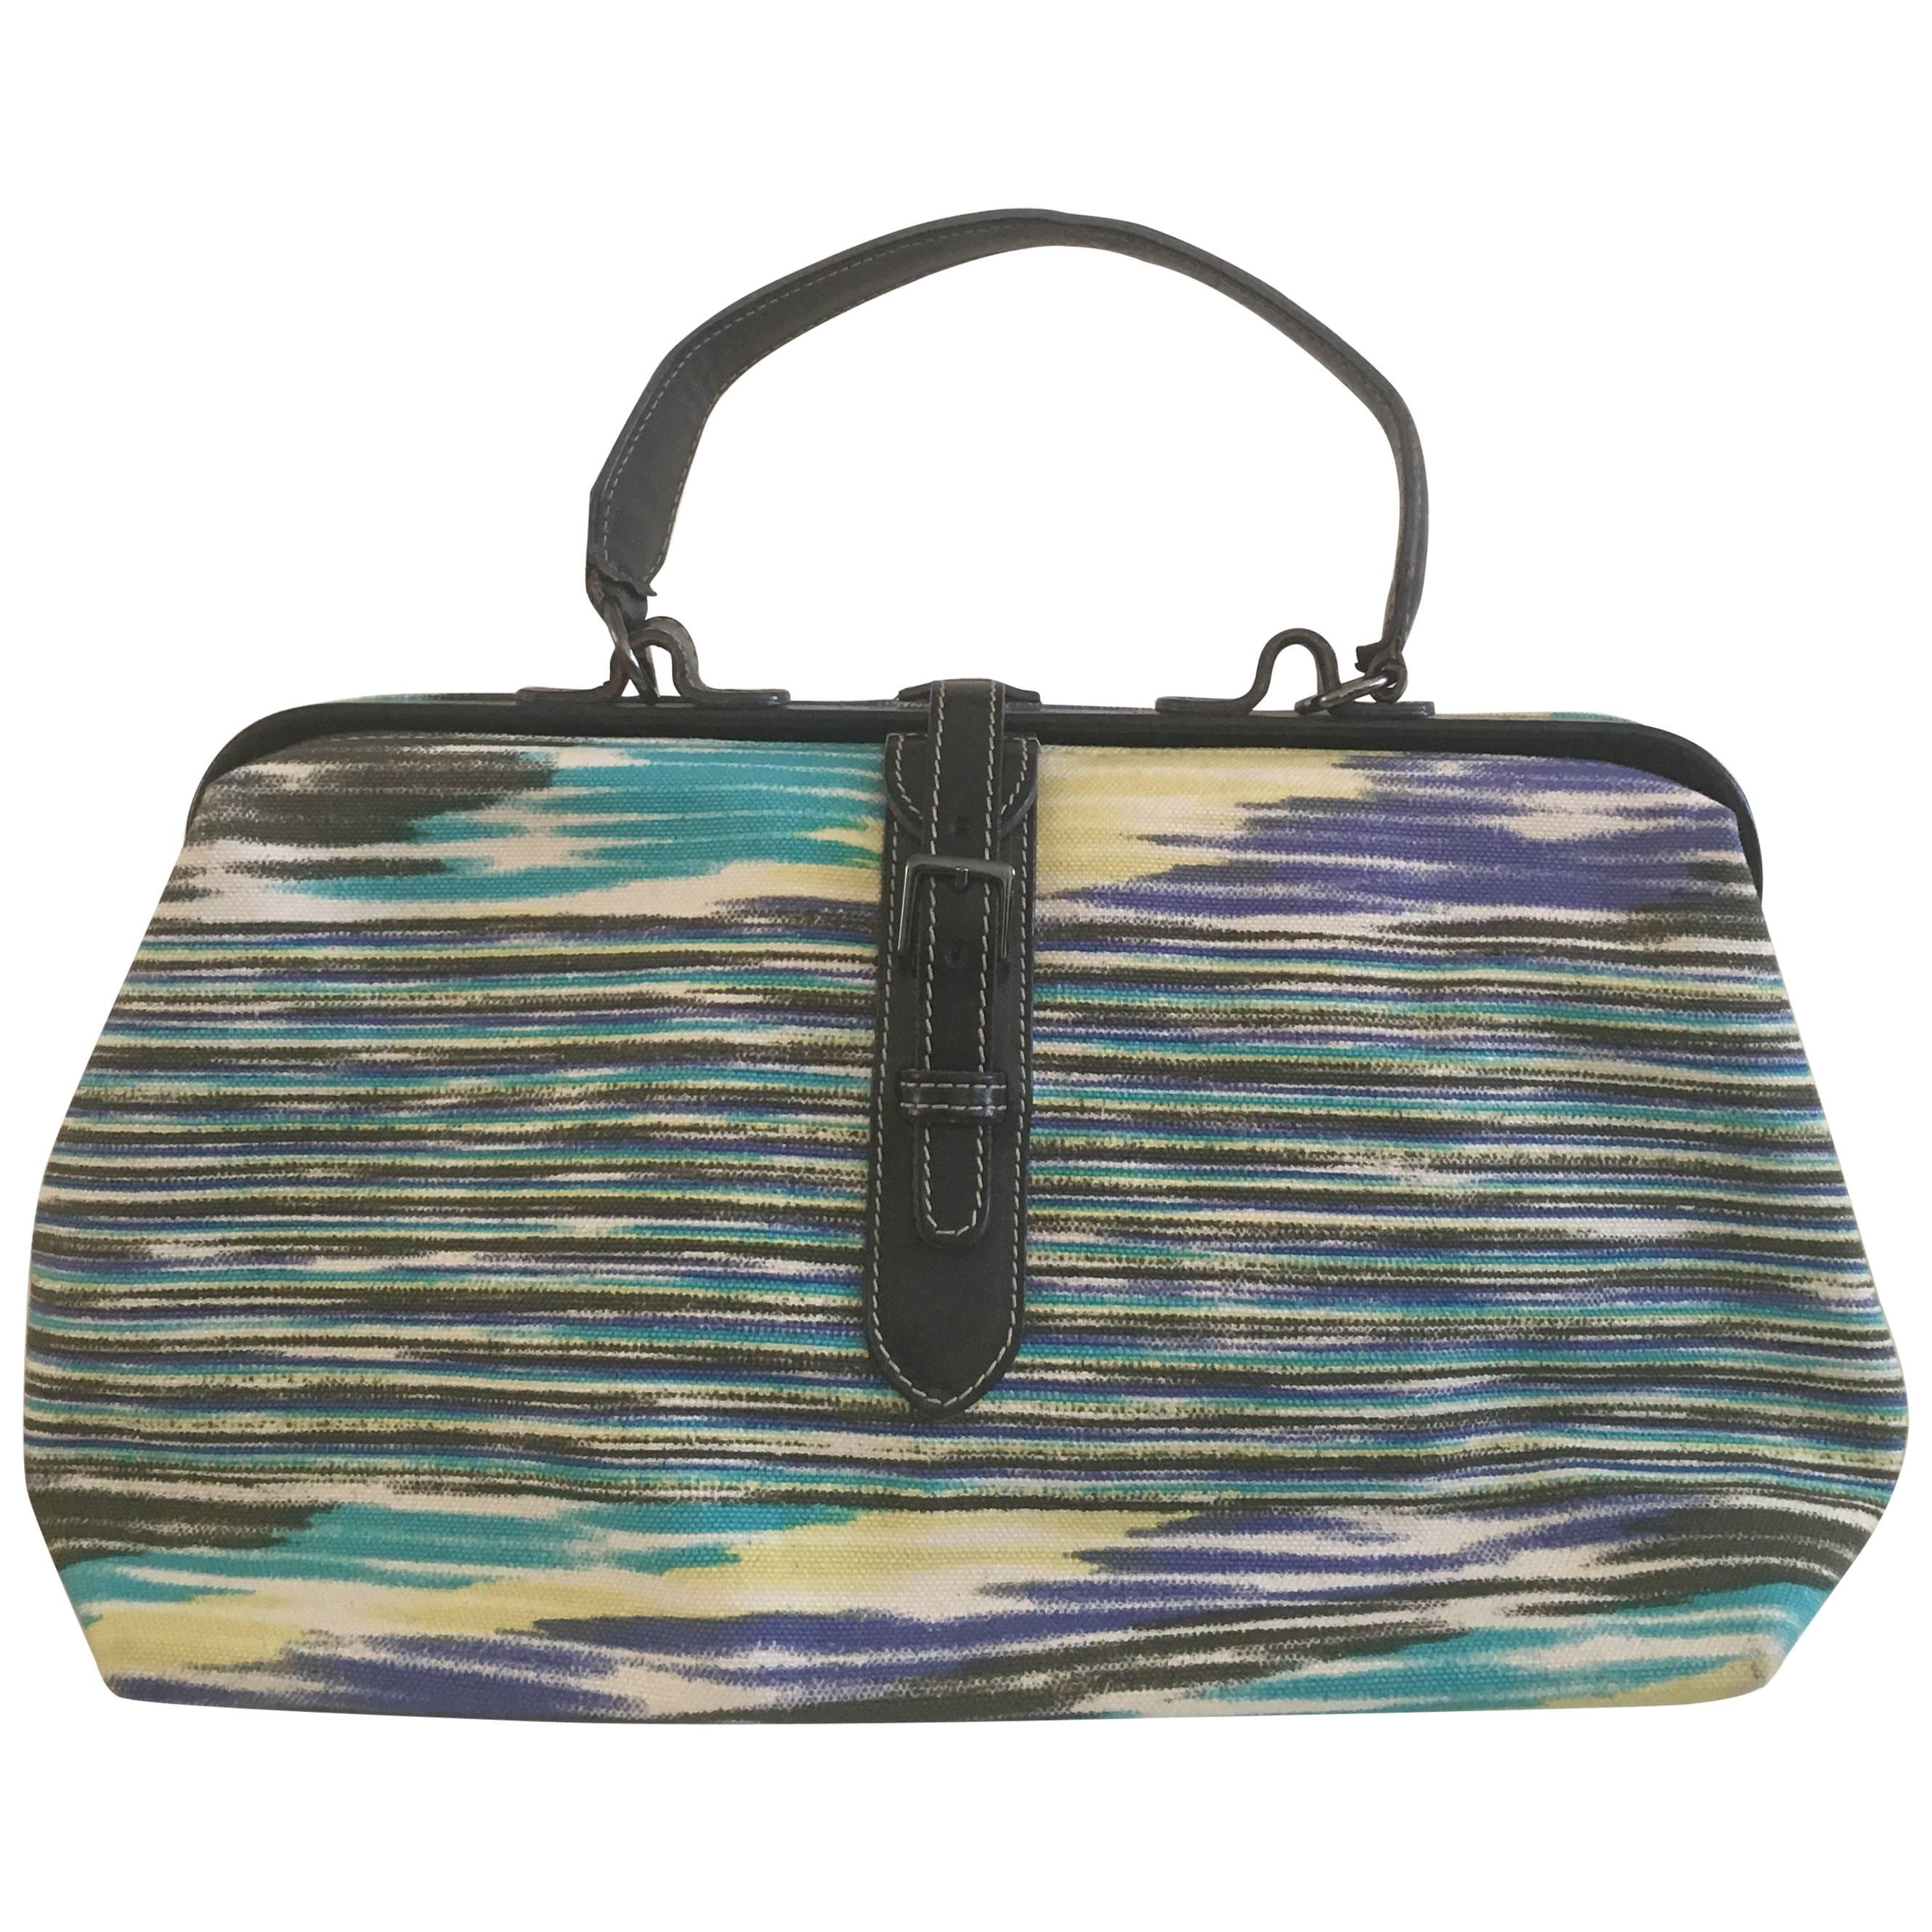 Missoni Canvas Doctor Handbag with Leather Trim. For Sale